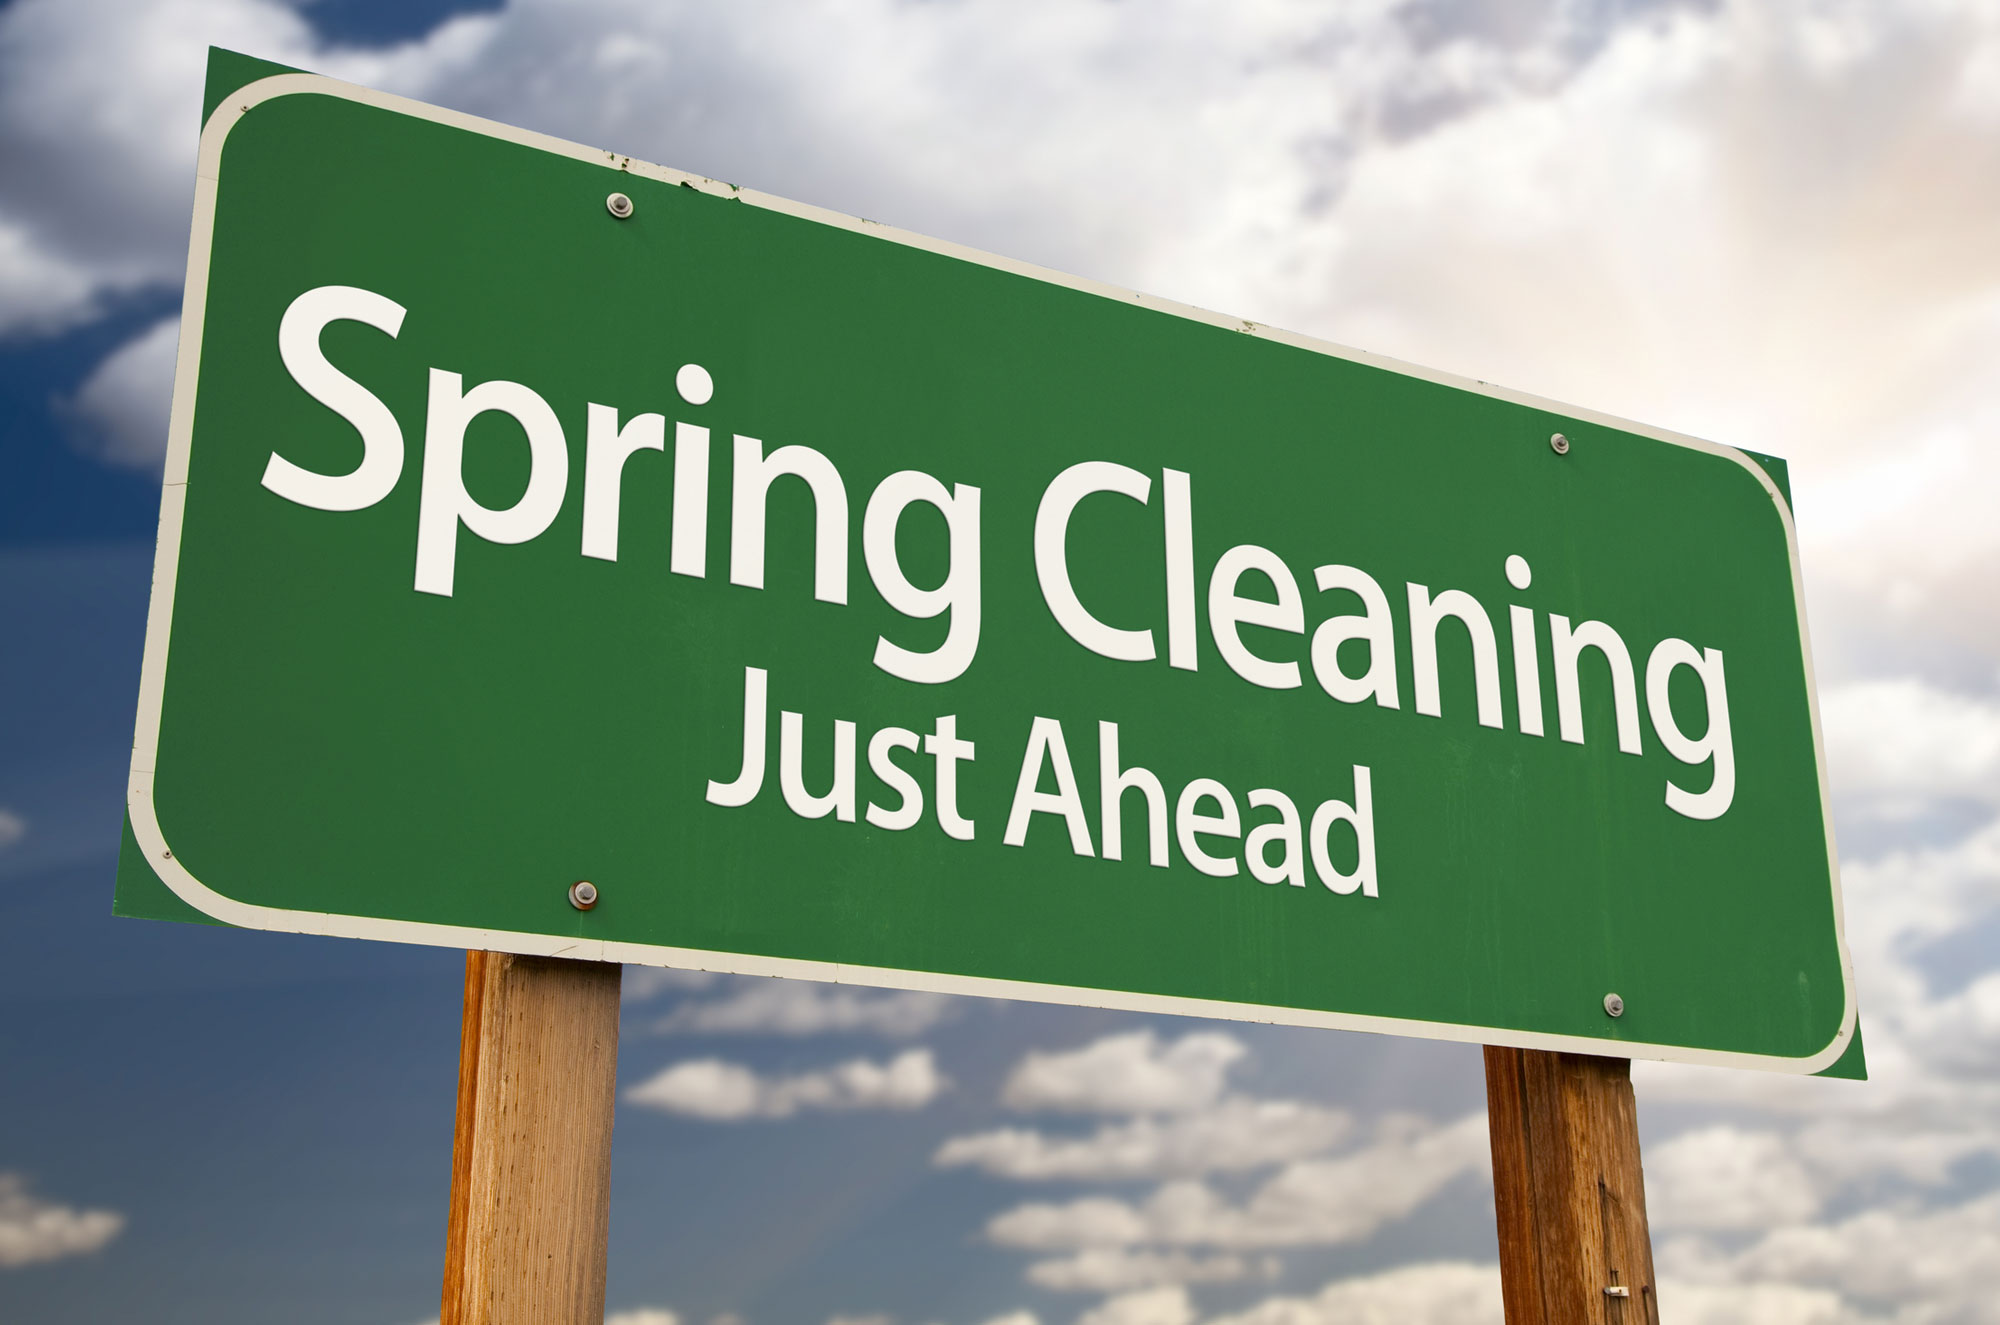 Spring Cleaning Guide